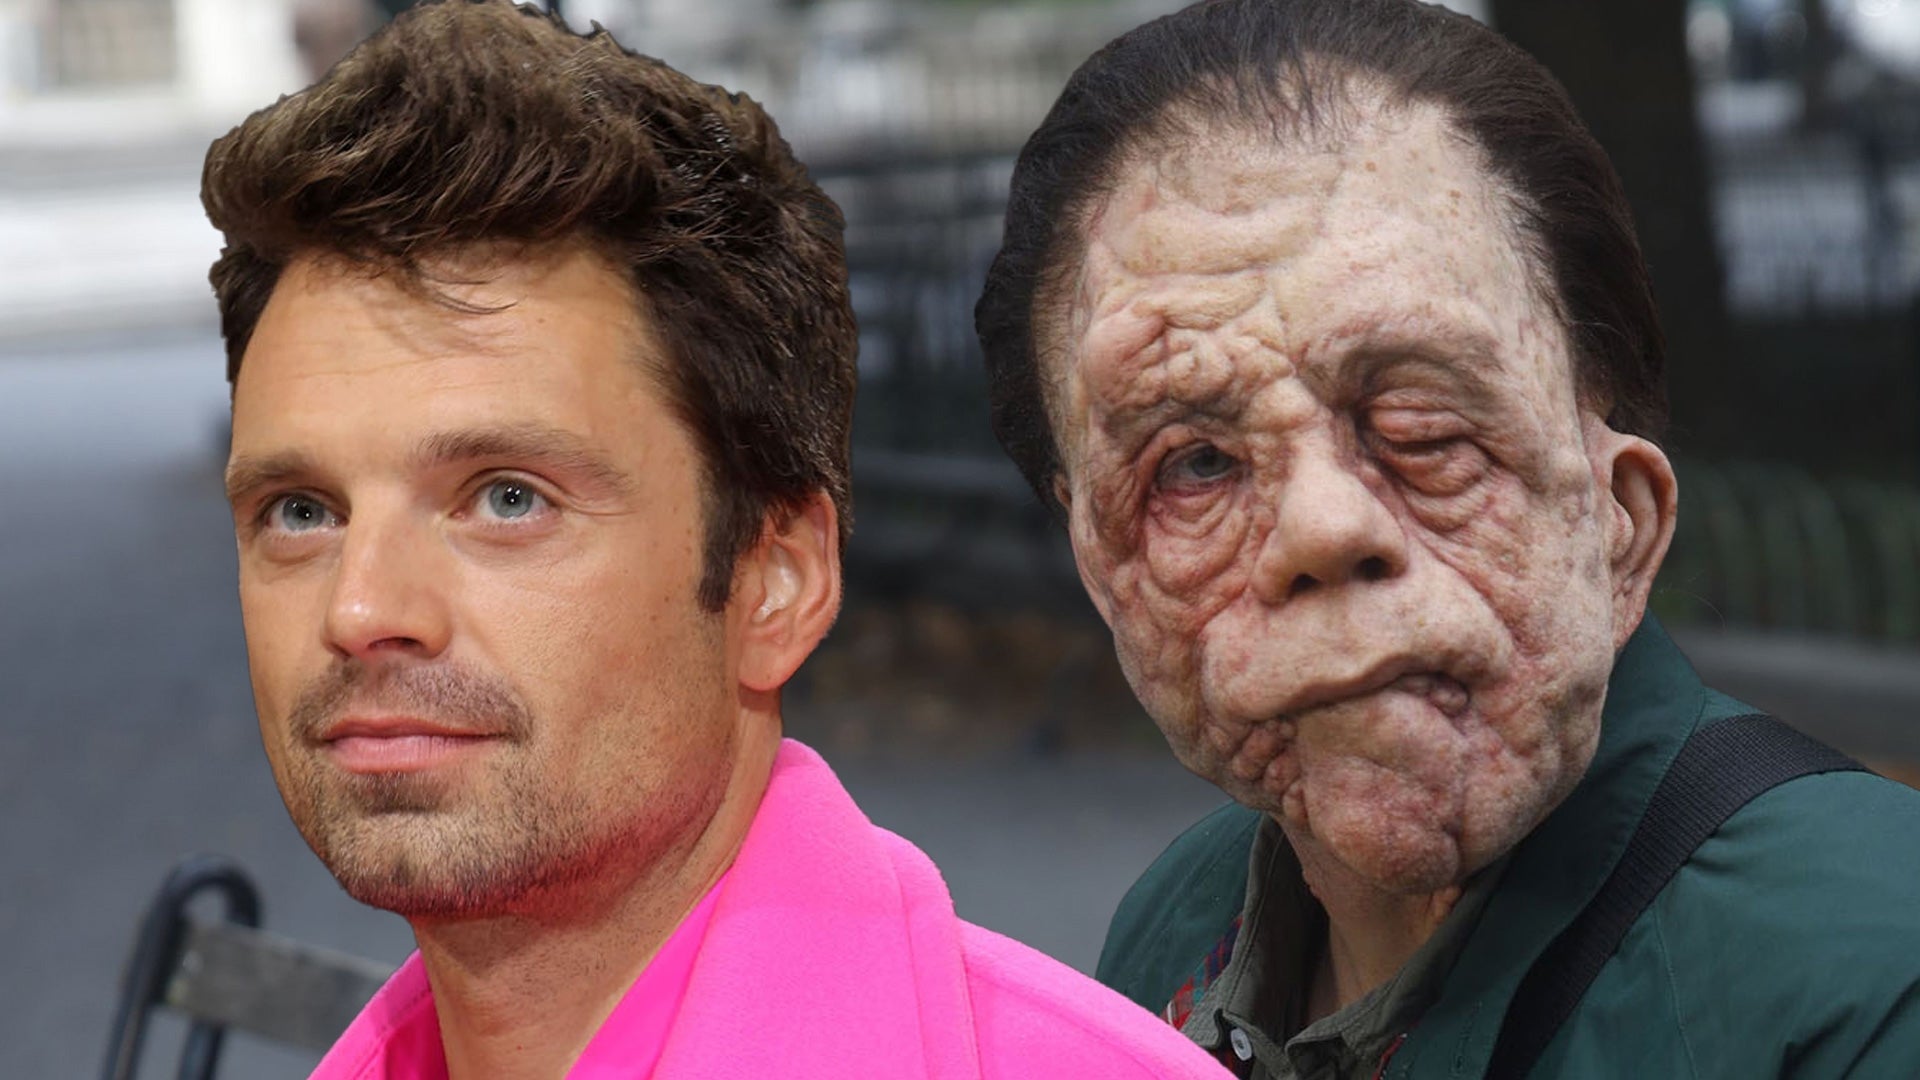 Sebastian Stan Completely Unrecognizable While Filming 'A Different Man'